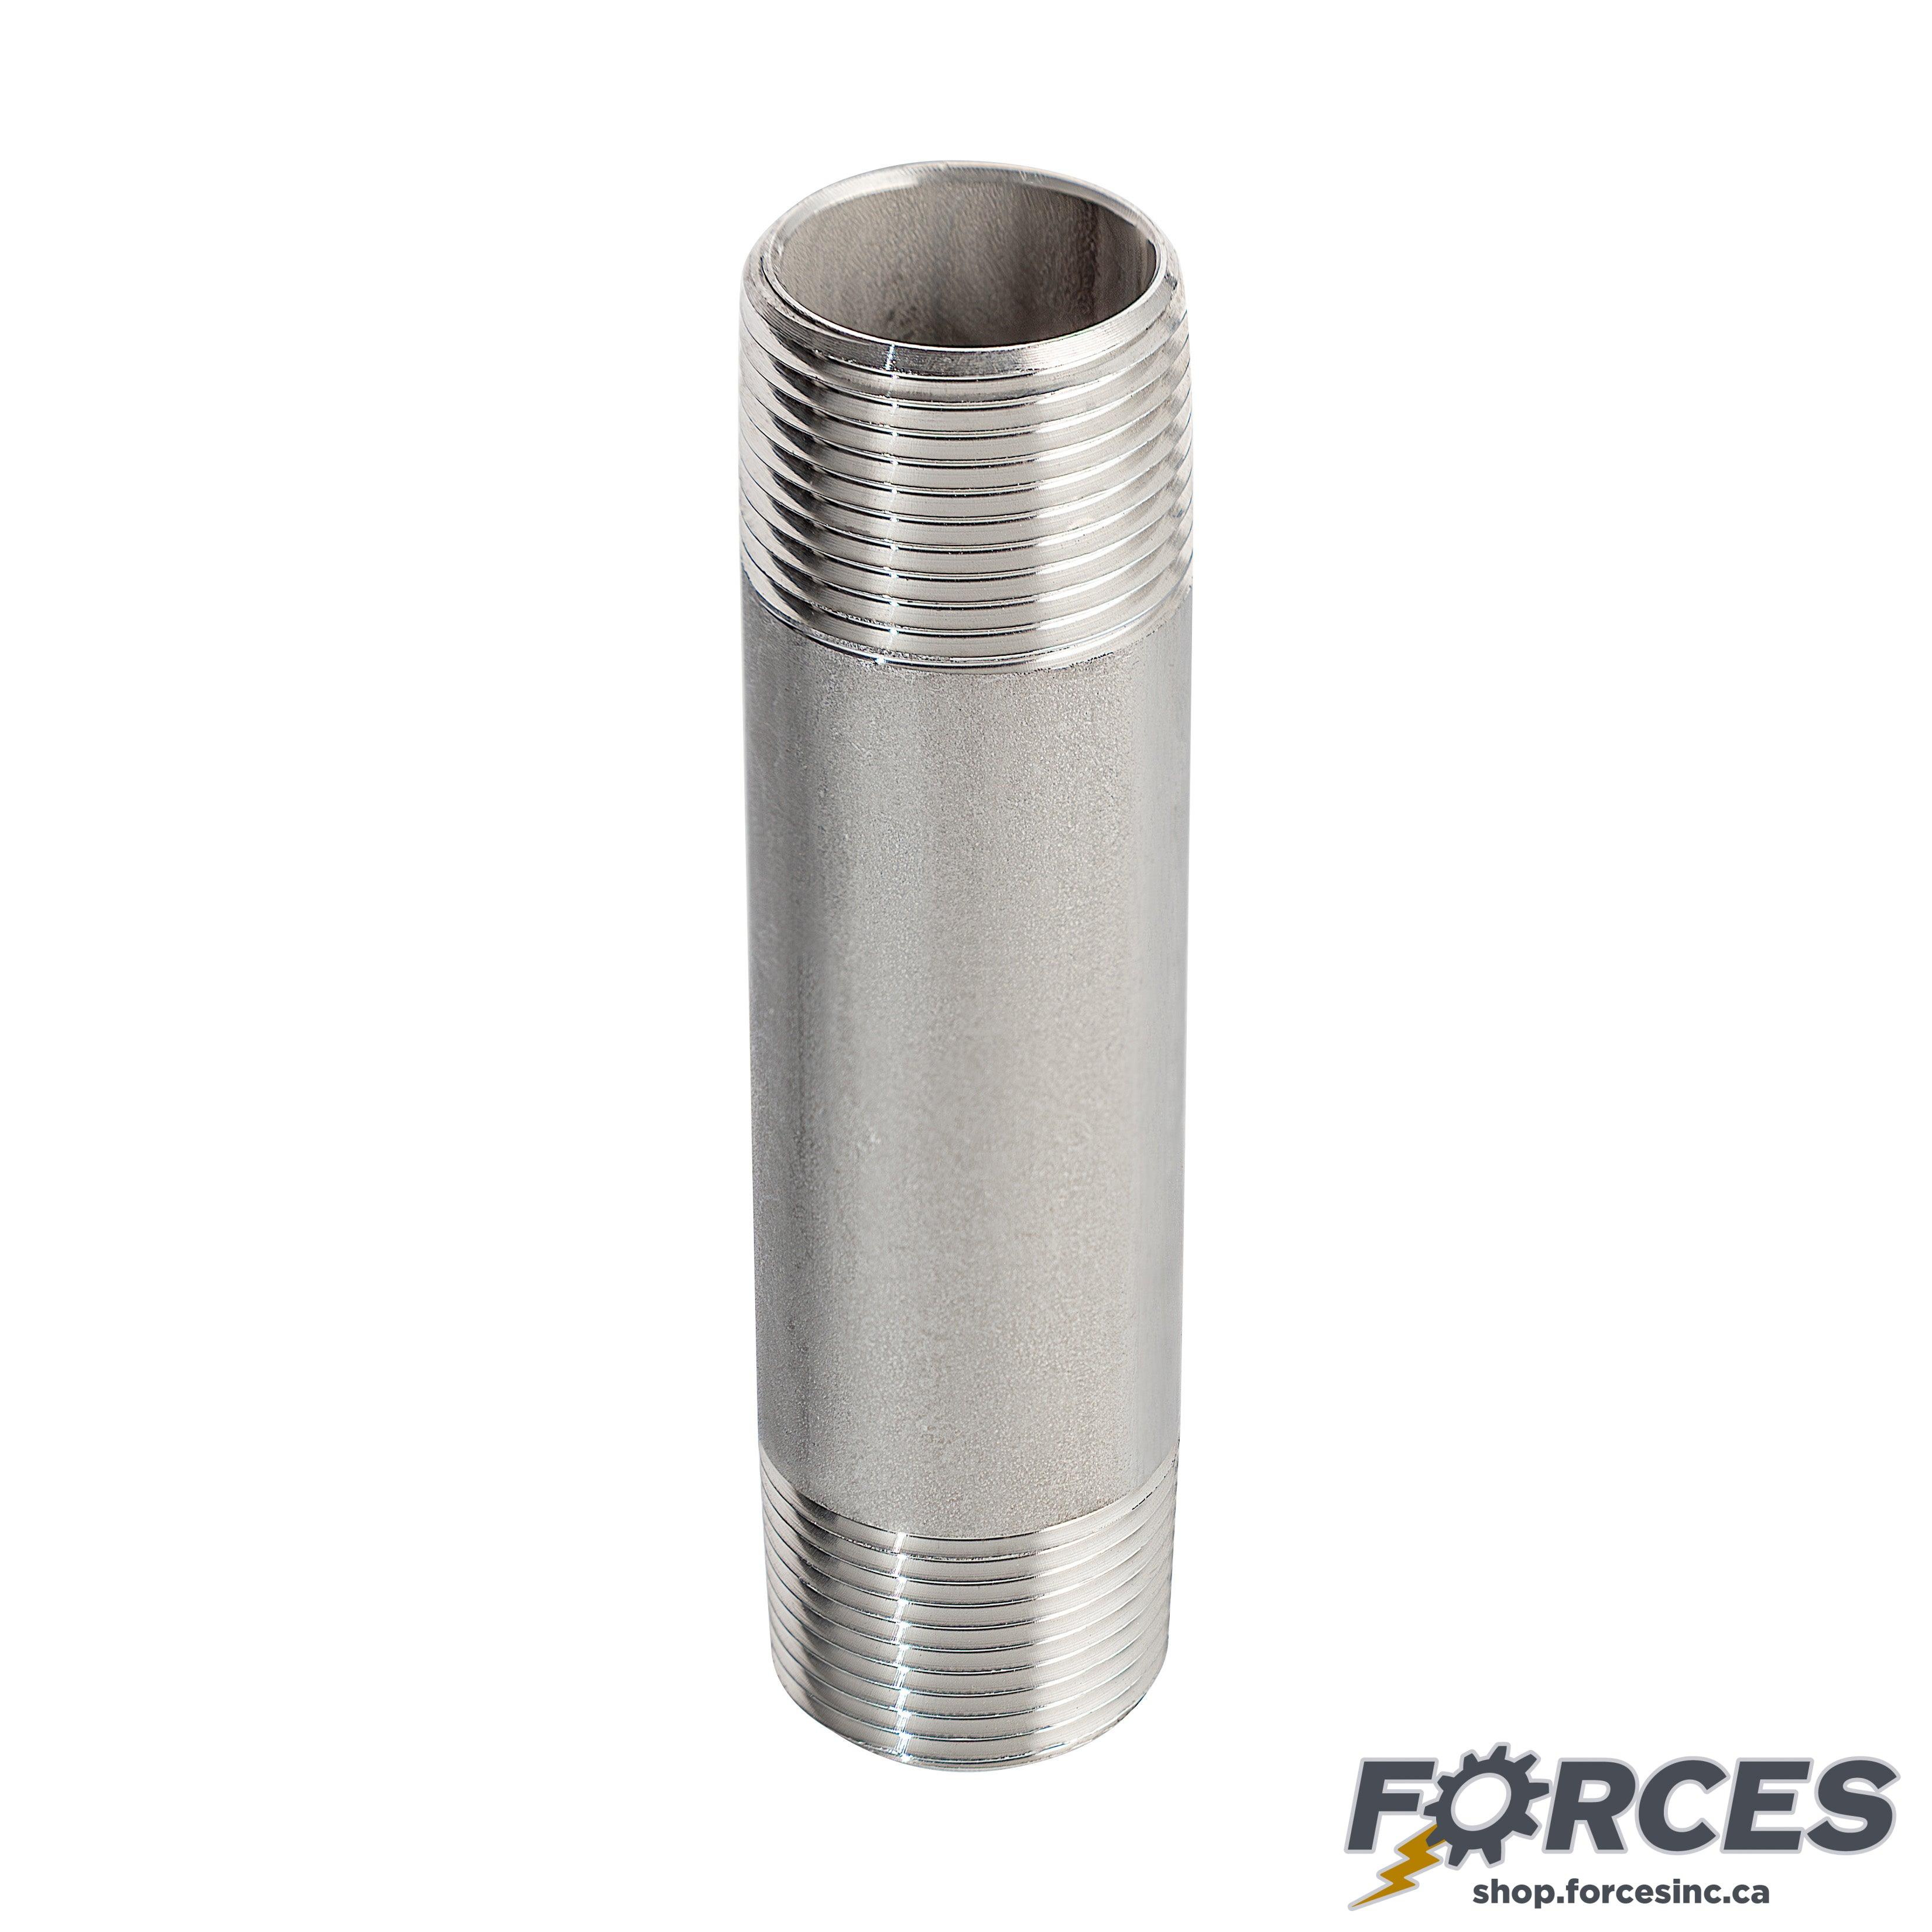 1/2" X 3" Long Nipple - Stainless Steel 316 - Forces Inc